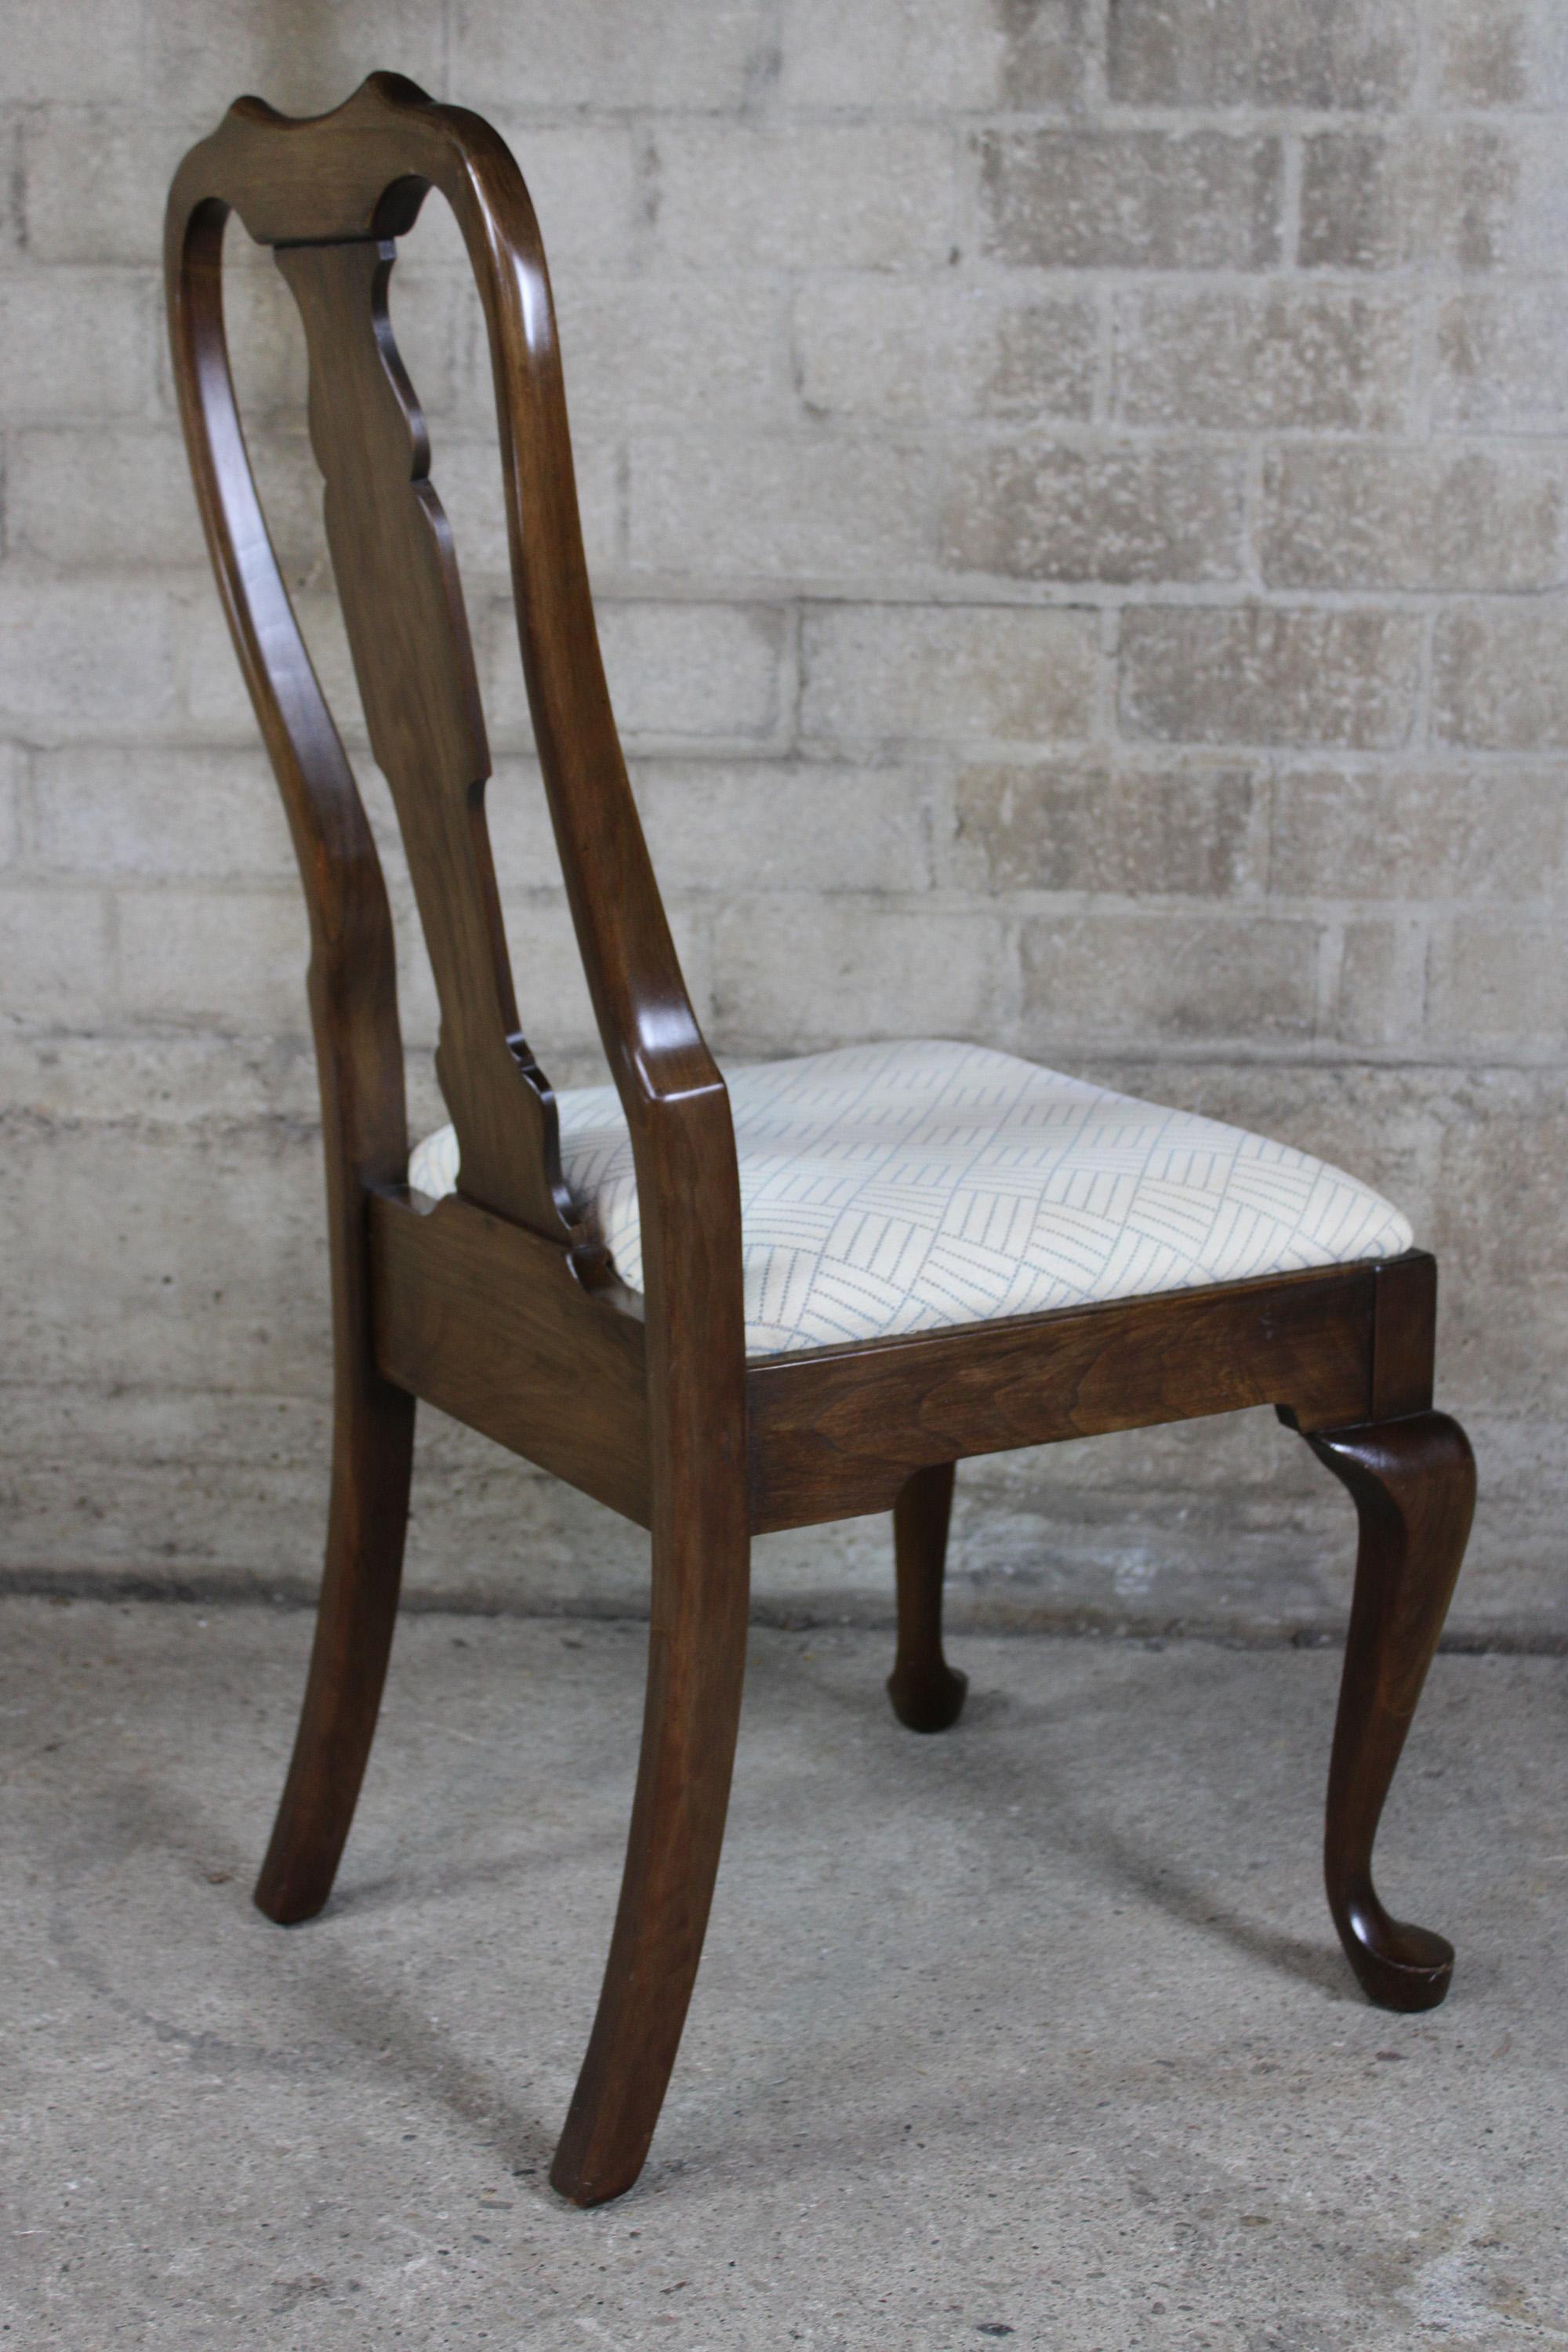 Upholstery 4 Vintage Pennsylvania House Traditional Queen Anne Cherry Dining Chairs 11-3109